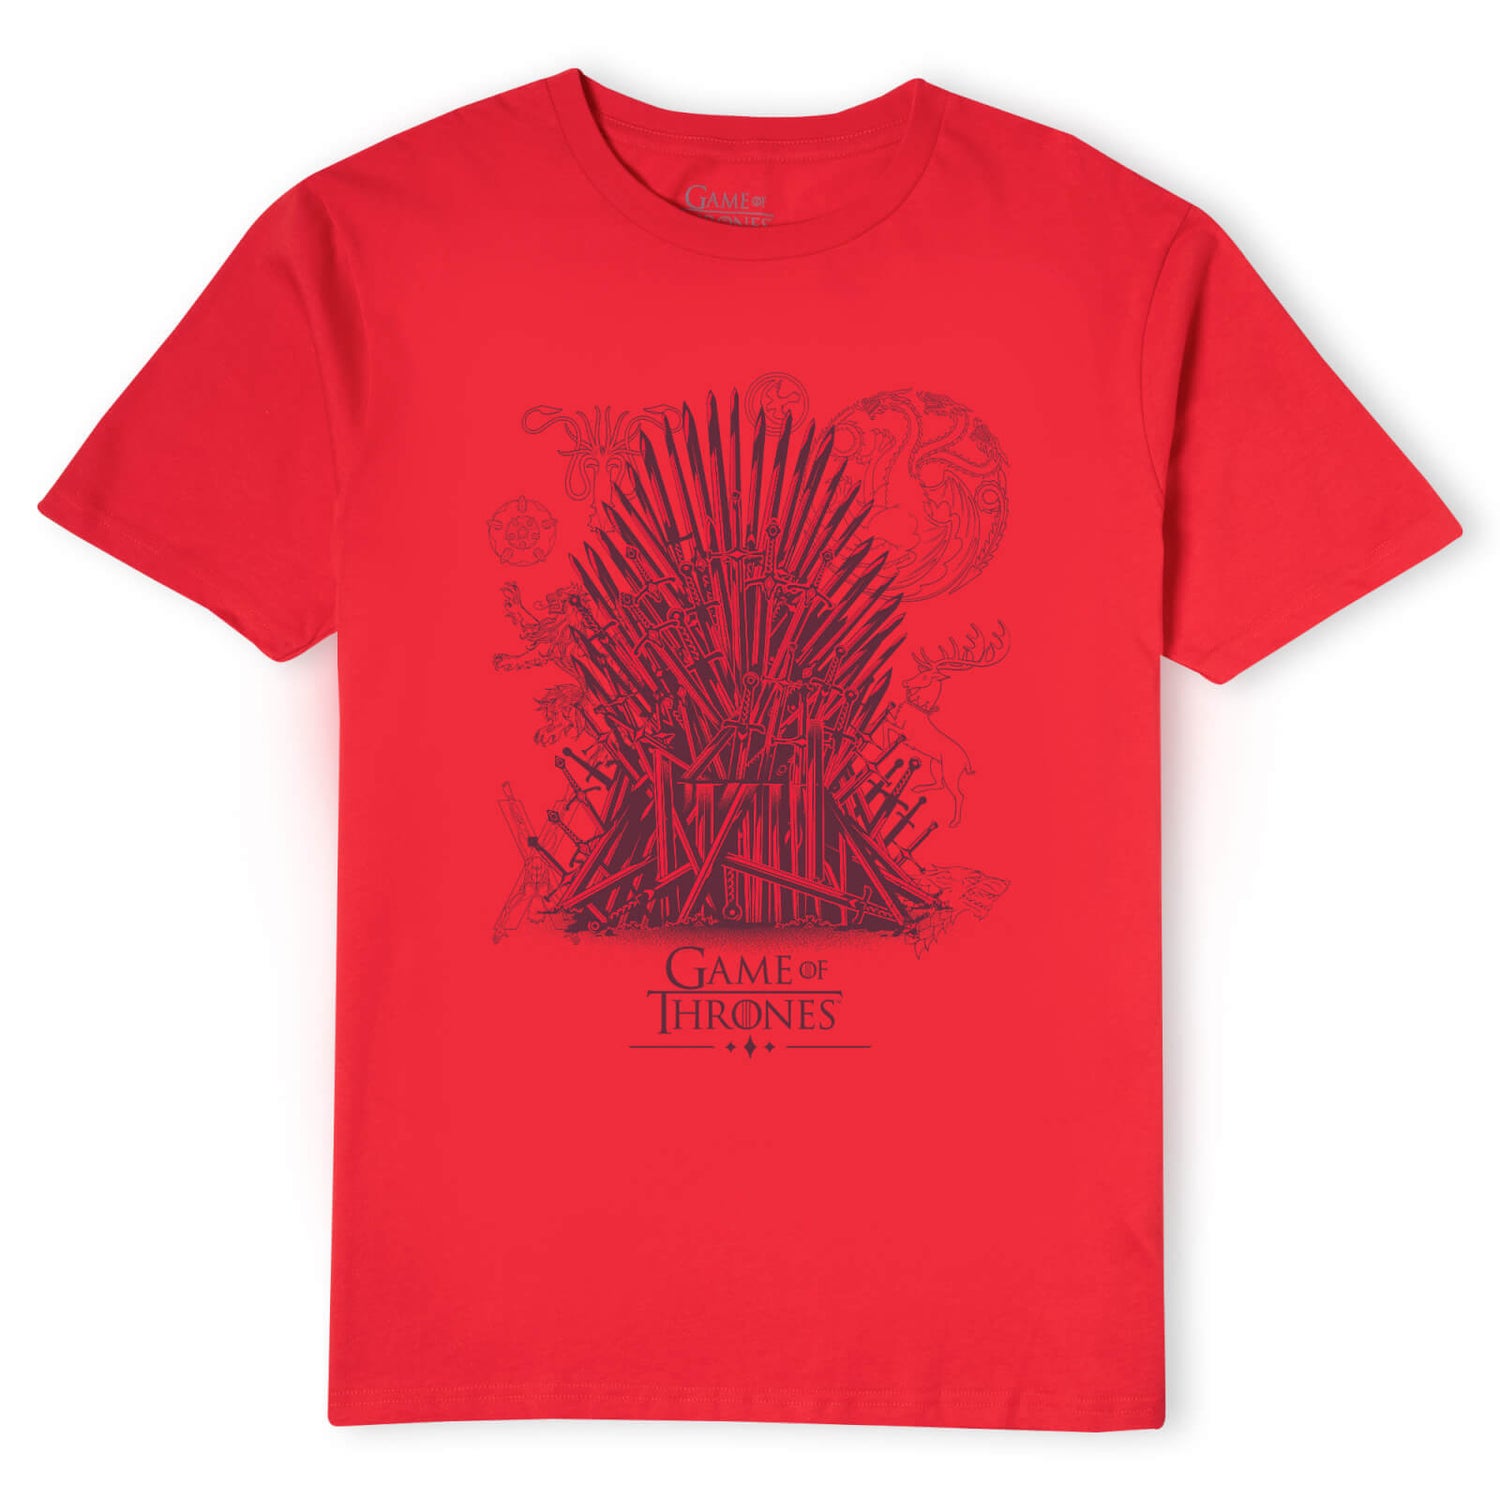 Game of Thrones The Iron Throne Men's T-Shirt - Red